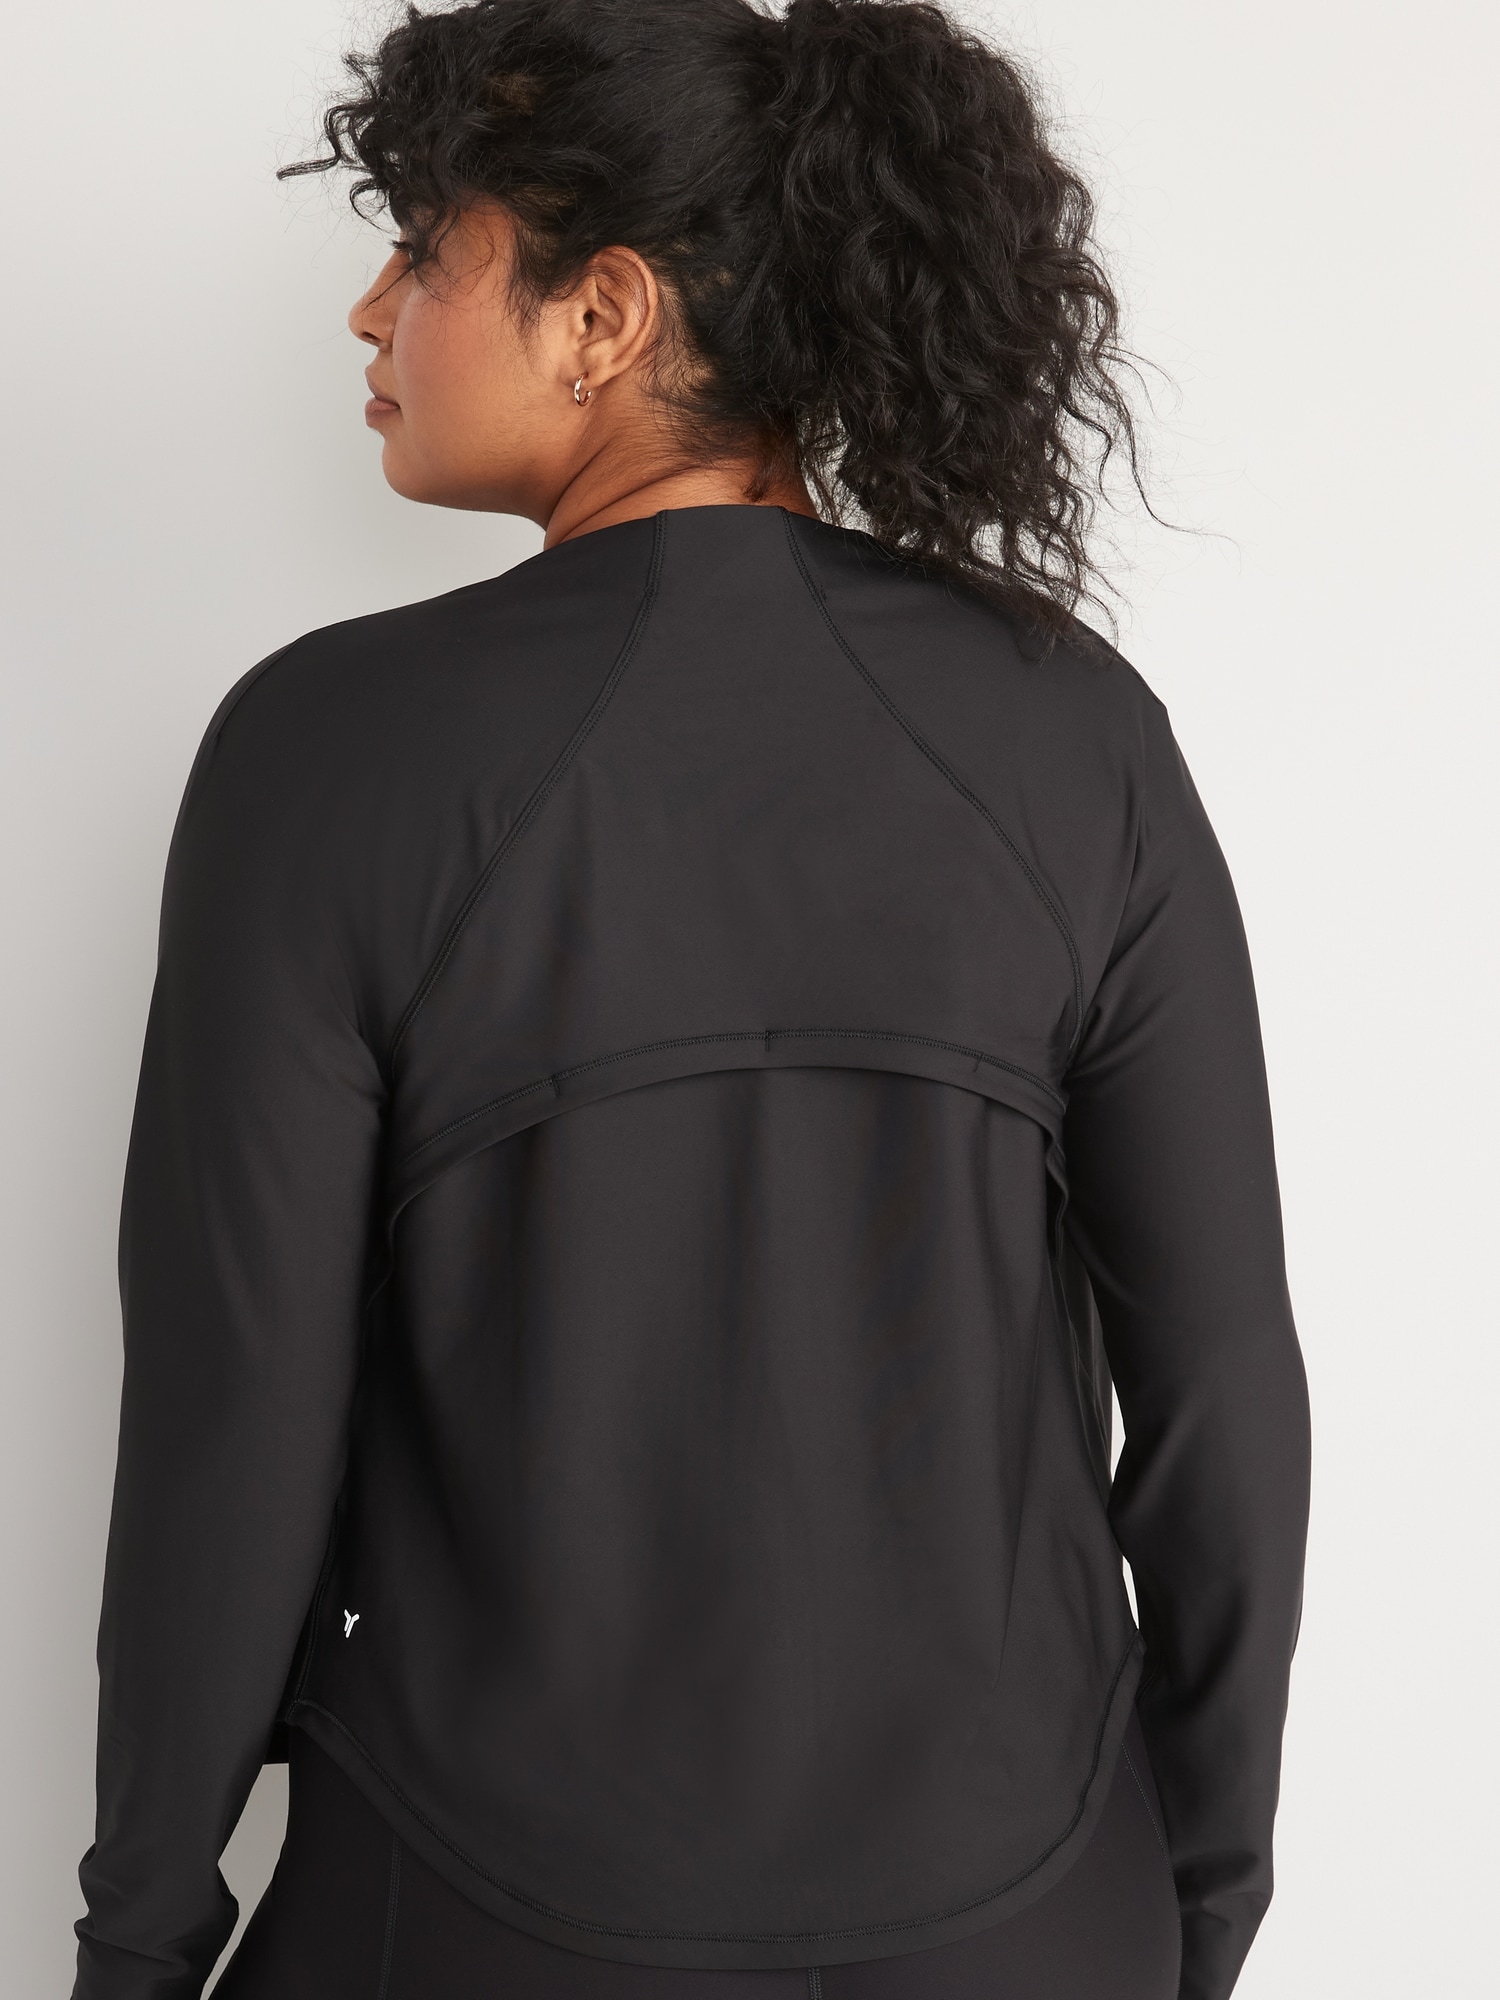 PowerSoft Cropped Full-Zip Performance Jacket for Women | Old Navy